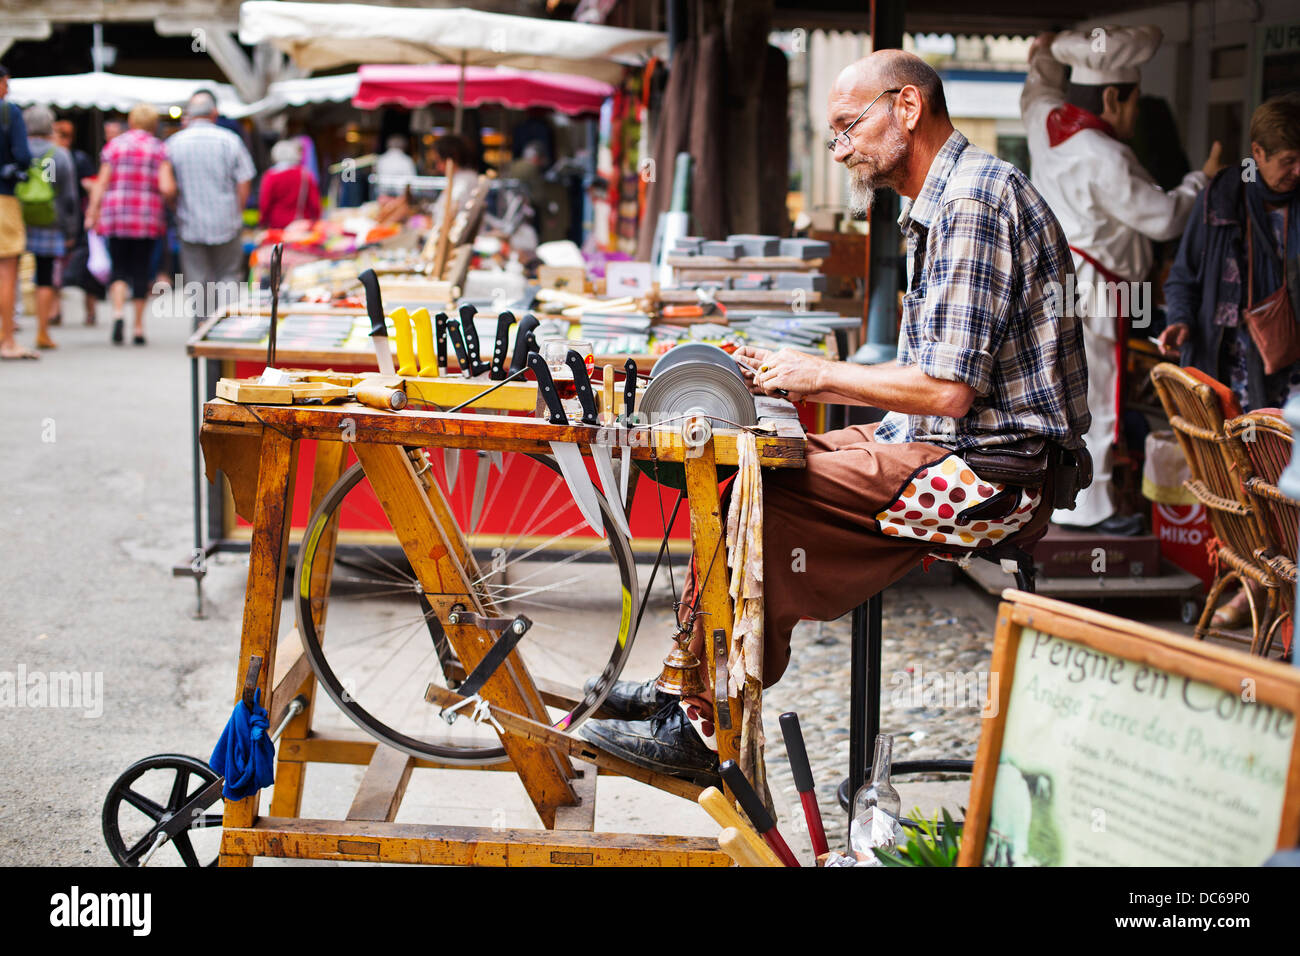 man sharpening knives in a French market Stock Photo